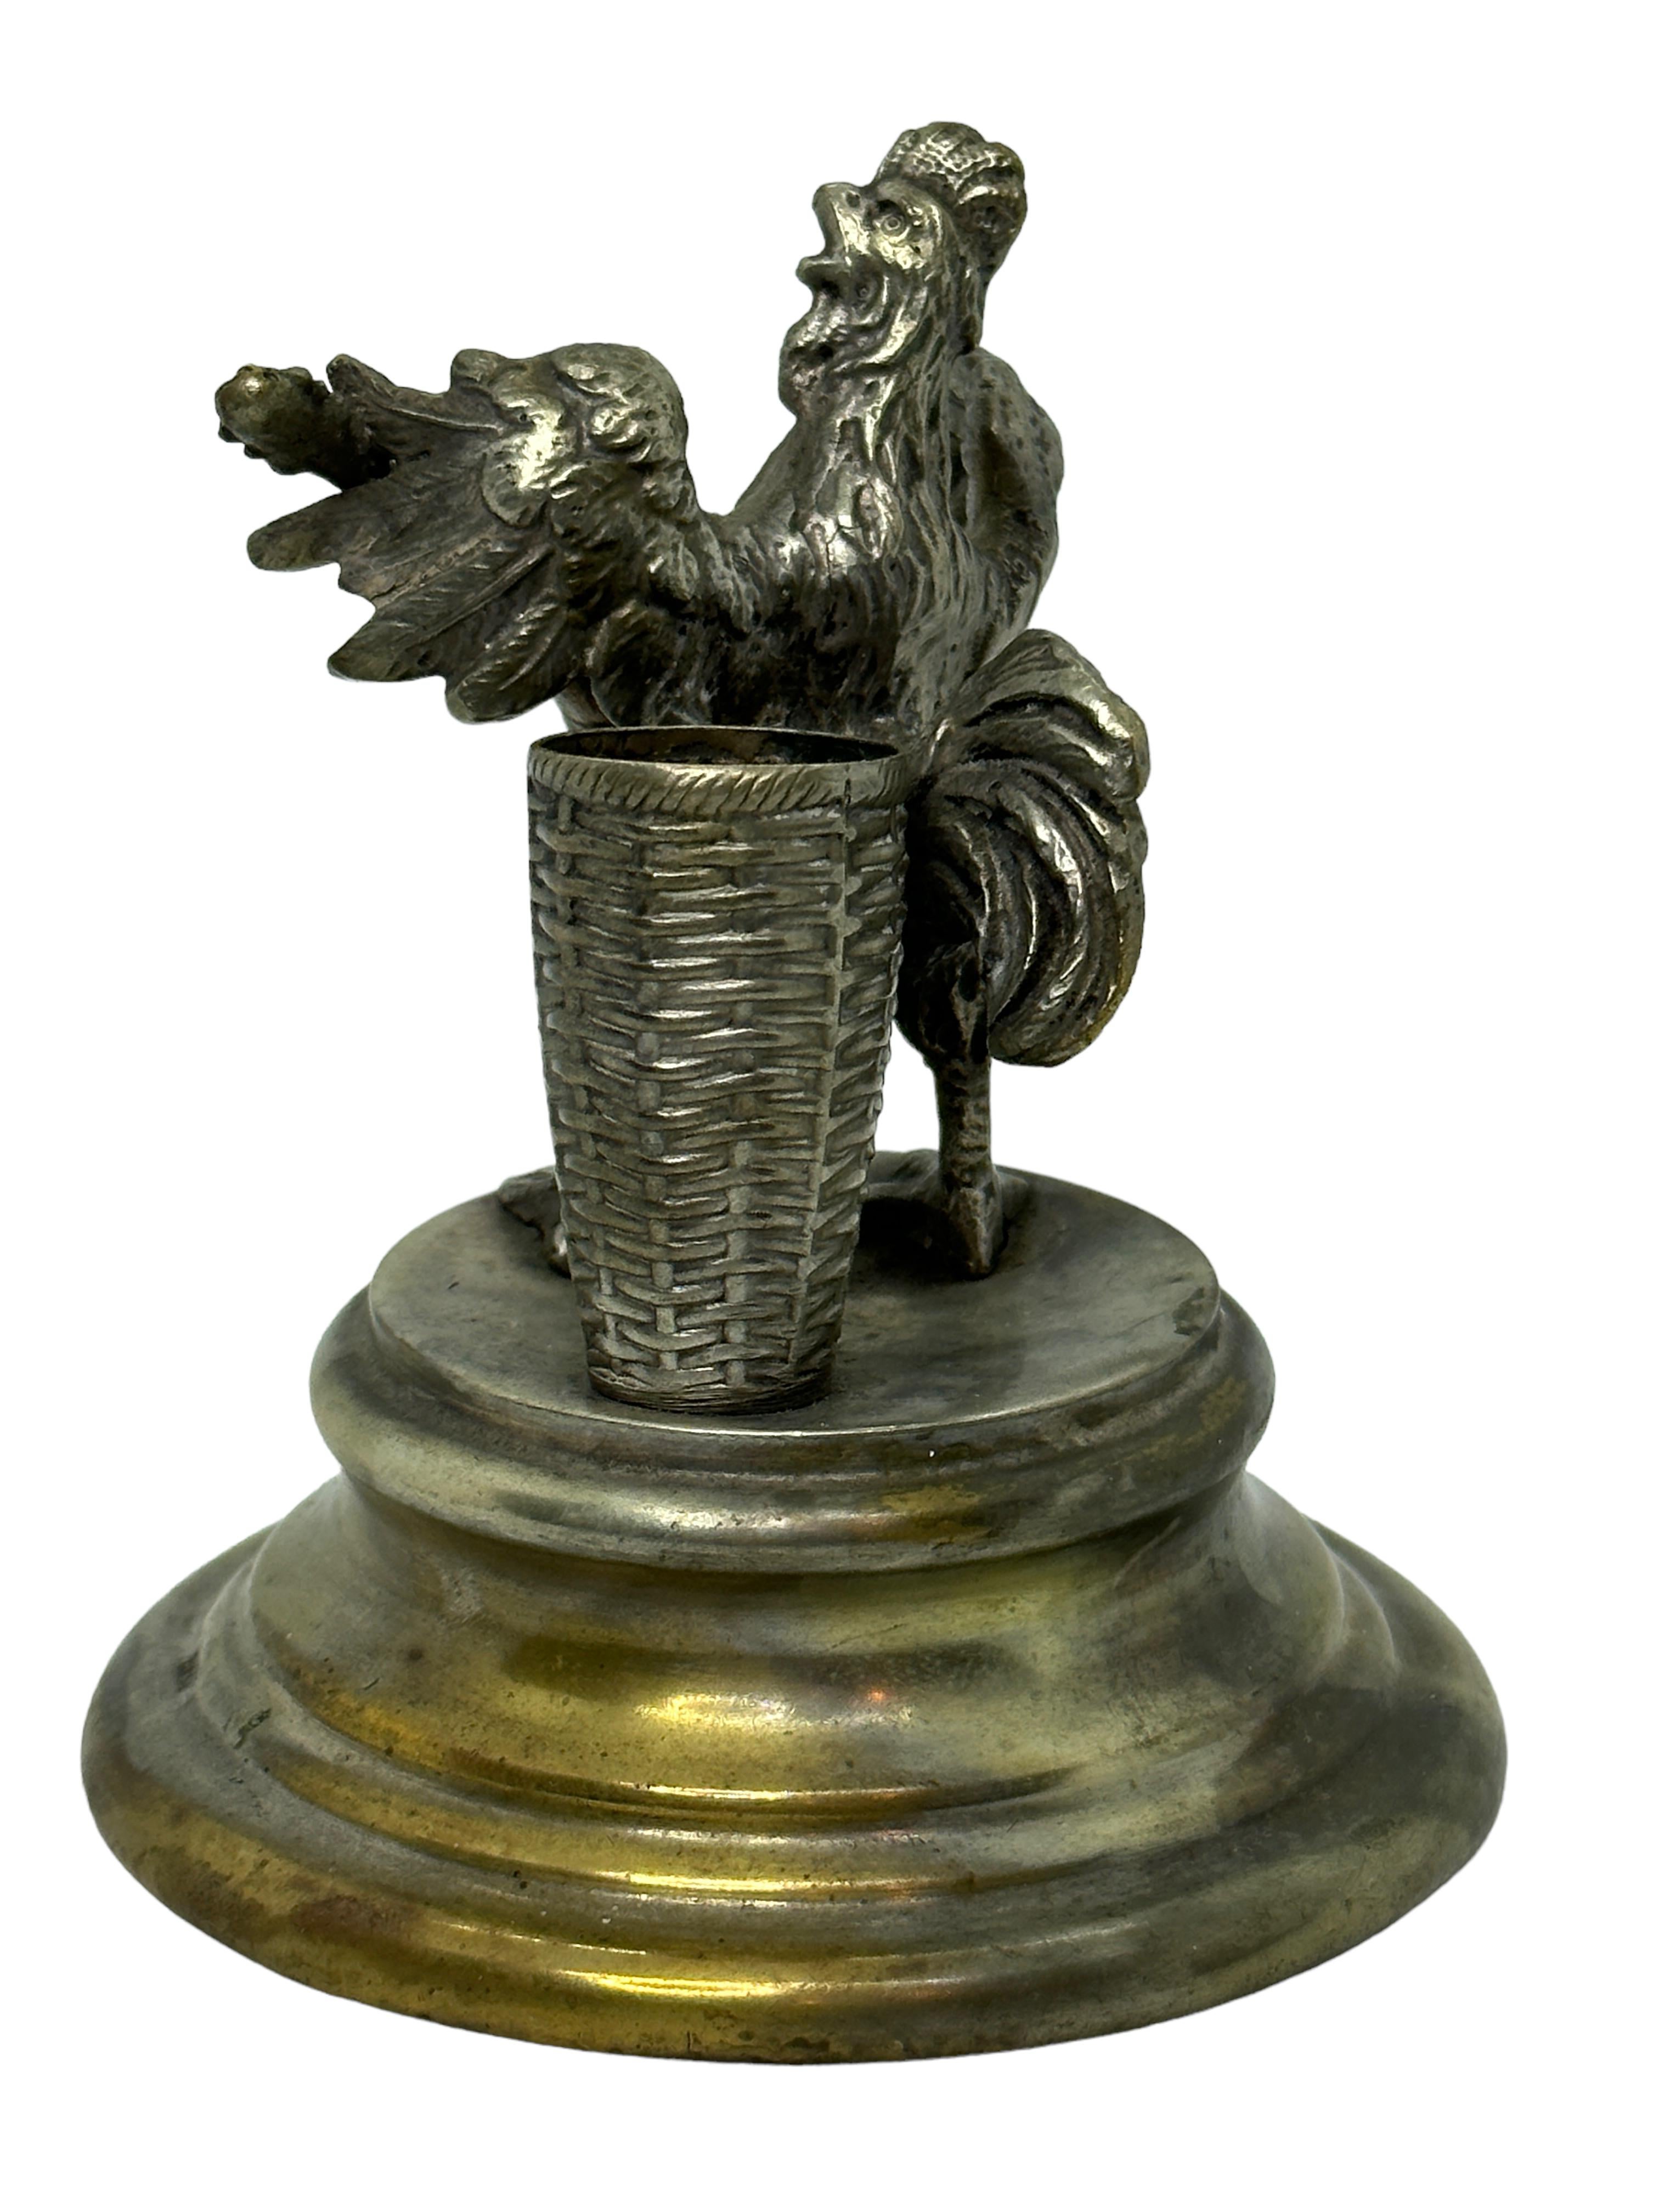 An antique decorative toothpick holder figure. Made of silver plated metal. A nice original antique item for displaying or just to use on your table. It is in the original as found condition. This piece has a beautiful patina and is in very good